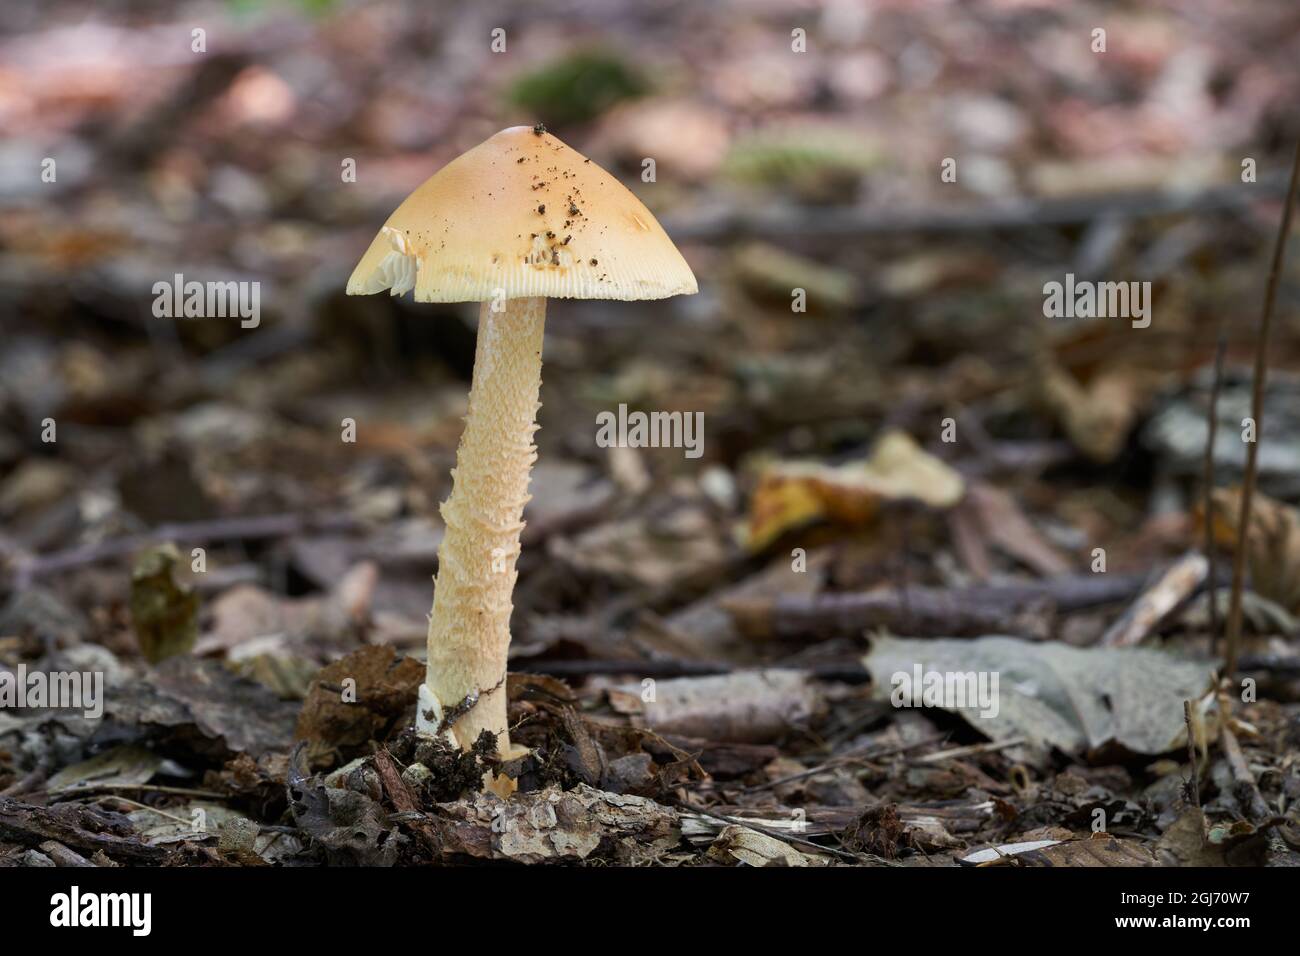 Edible mushroom Amanita crocea in mixed forest. Known as saffron ringless amanita. Wild mushroom growing in the leaves. Stock Photo